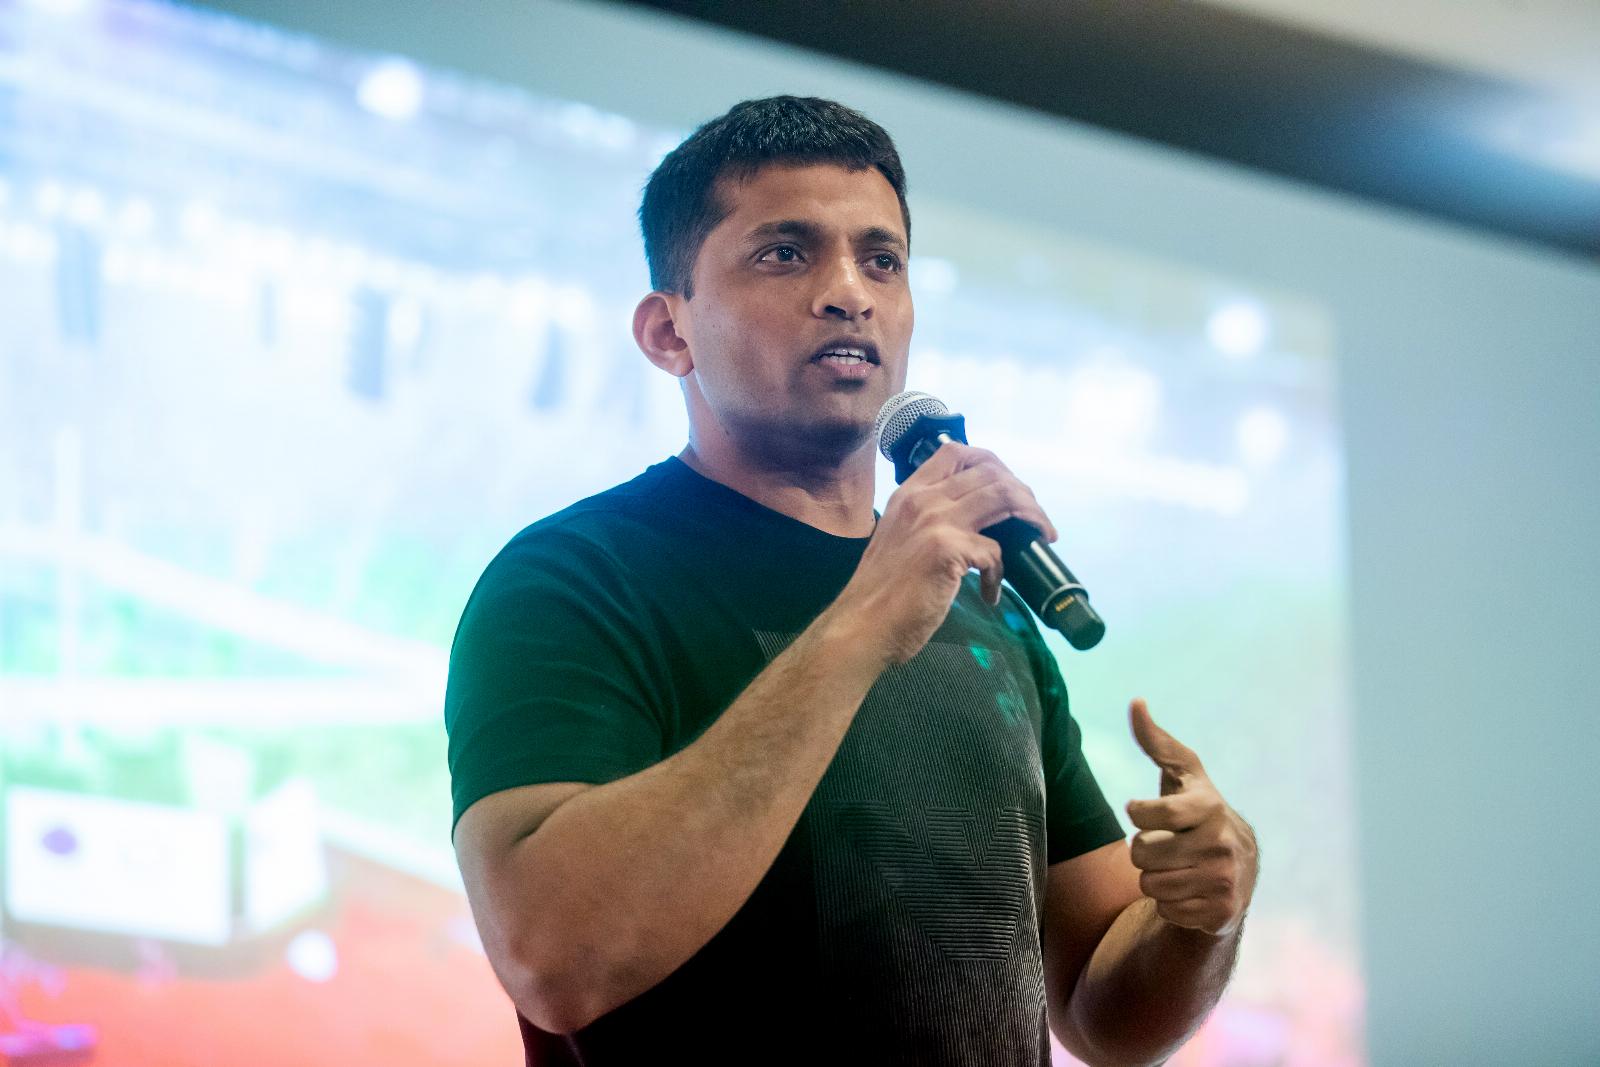 Indian edtech giant Byju’s raises $250 million, on track to close another $700 million